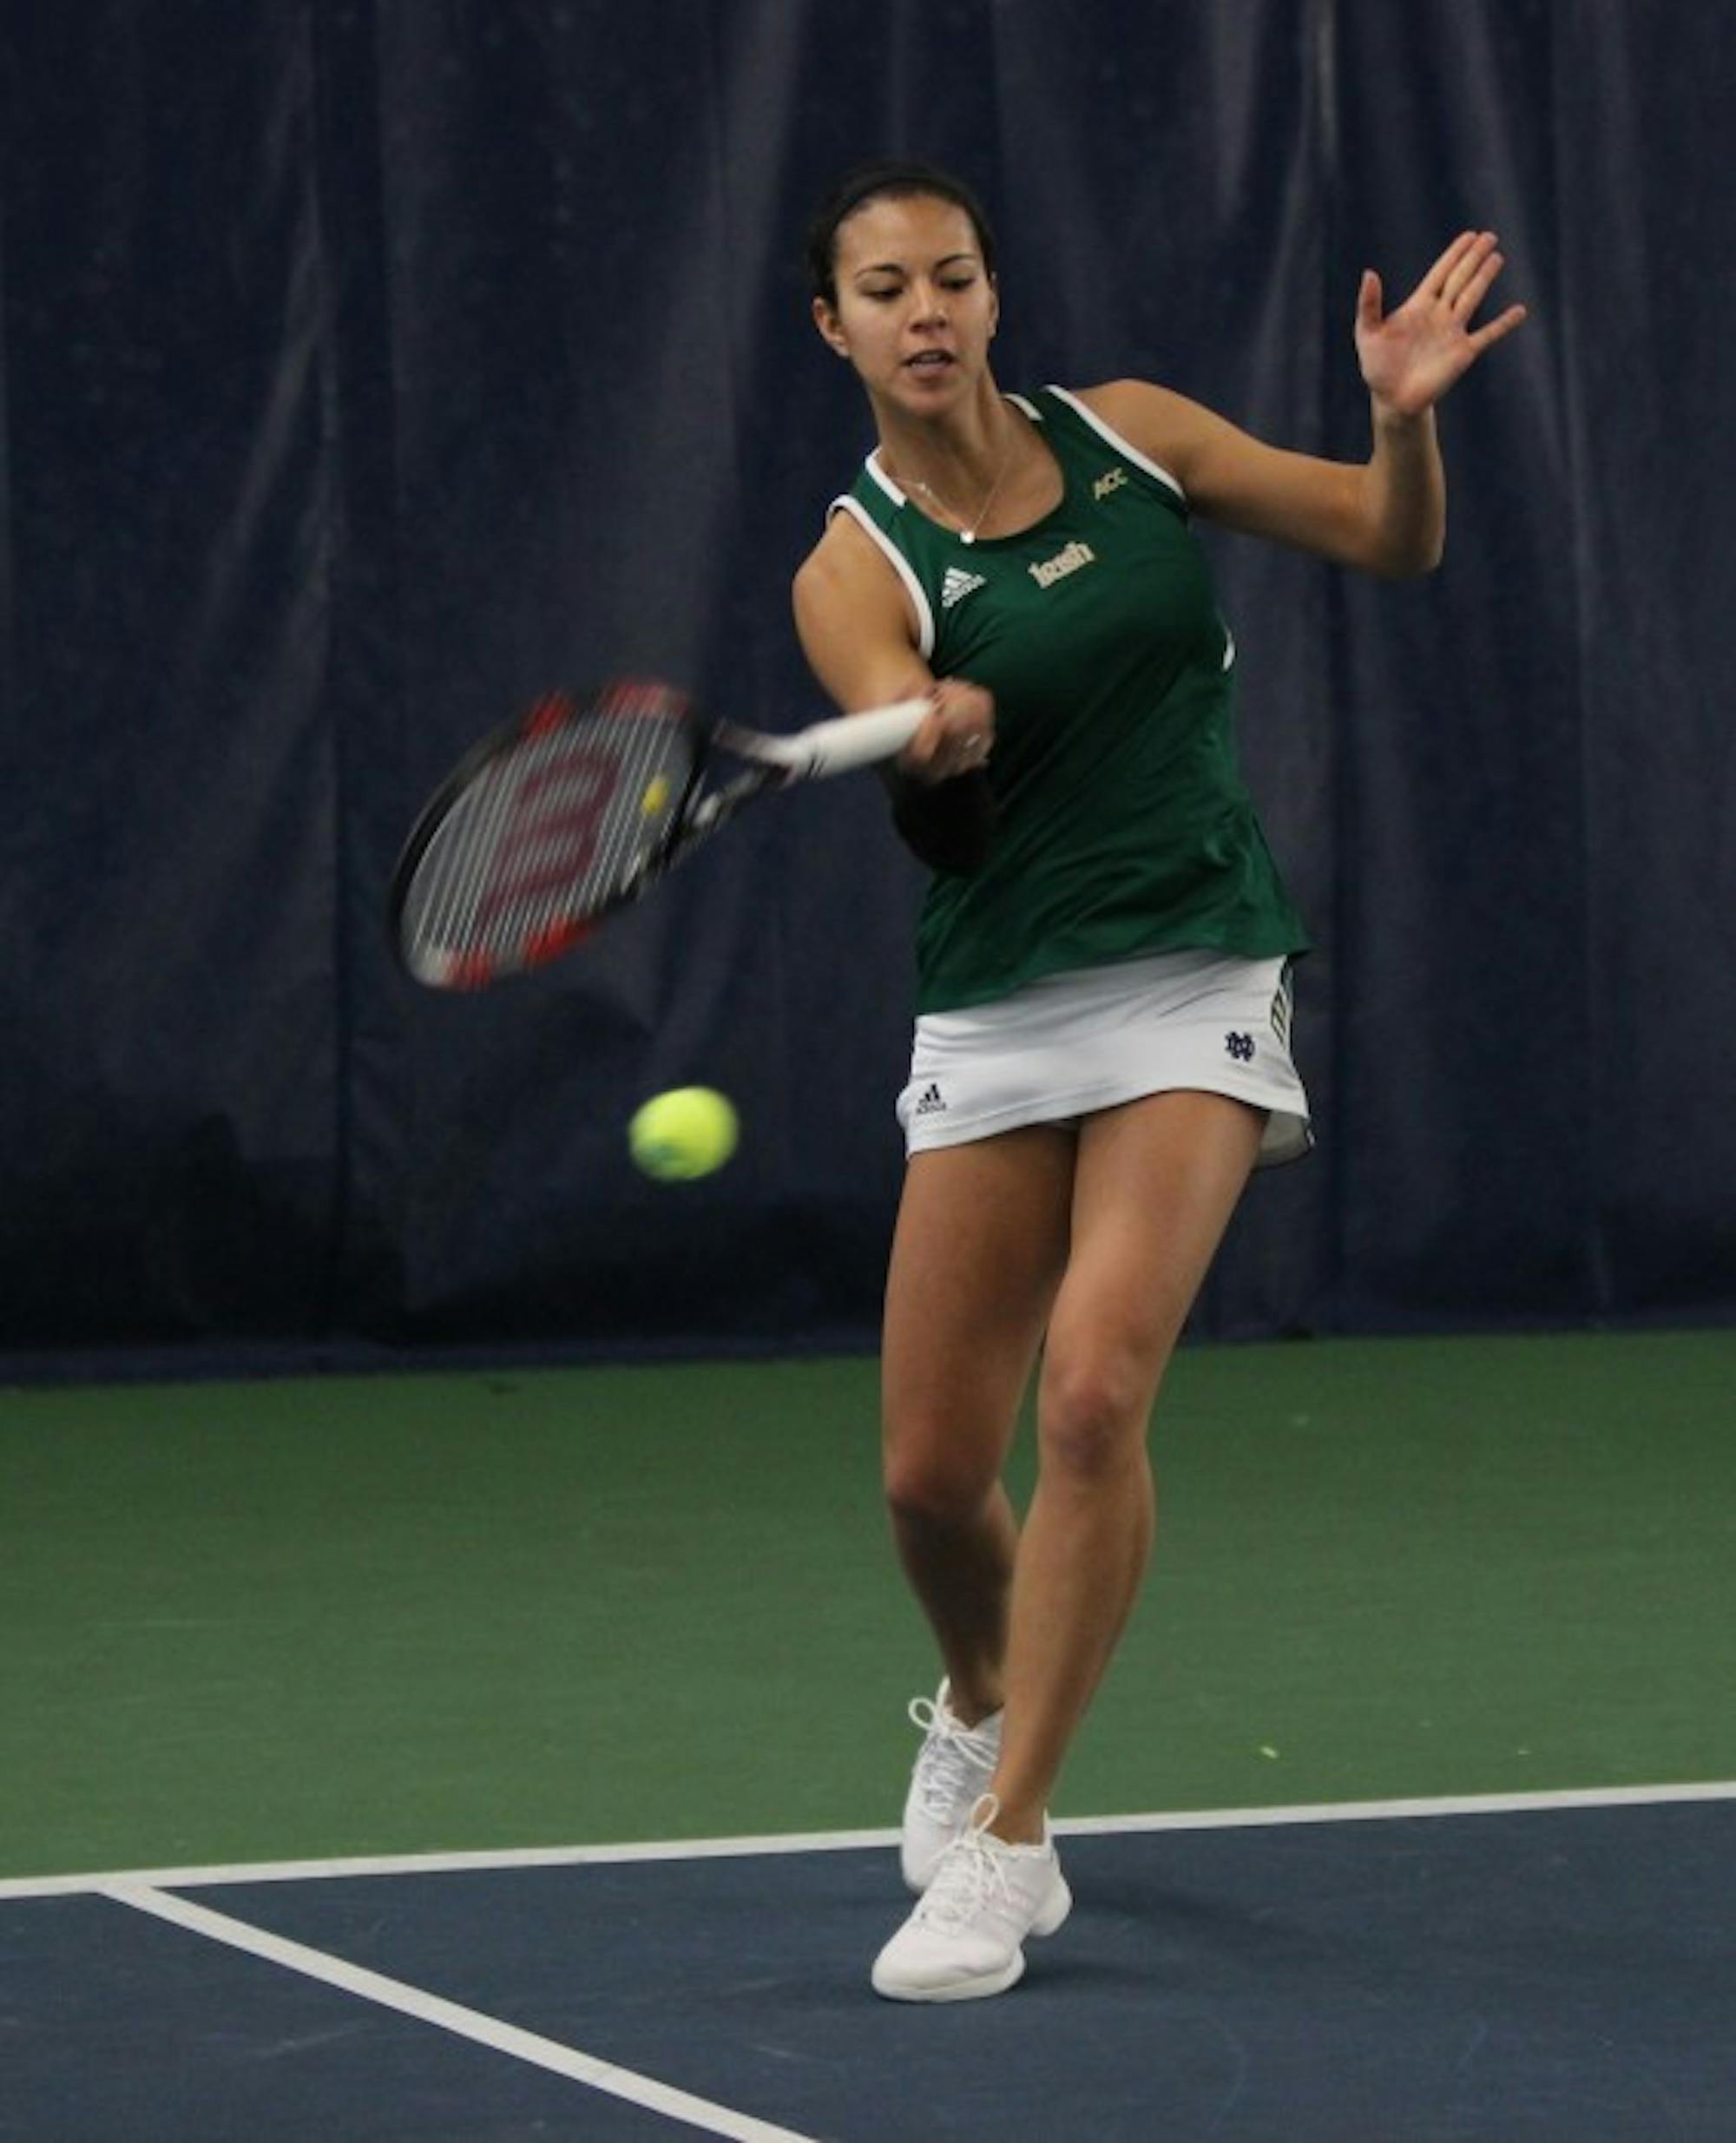 Senior Britney Sanders hits a wide forehand in her doubles match against Georgia Tech on Feb. 21. Sanders and doubles partner sophomore Quinn Gleason fell 3-6, 6-3, 7-5 to their opponents.